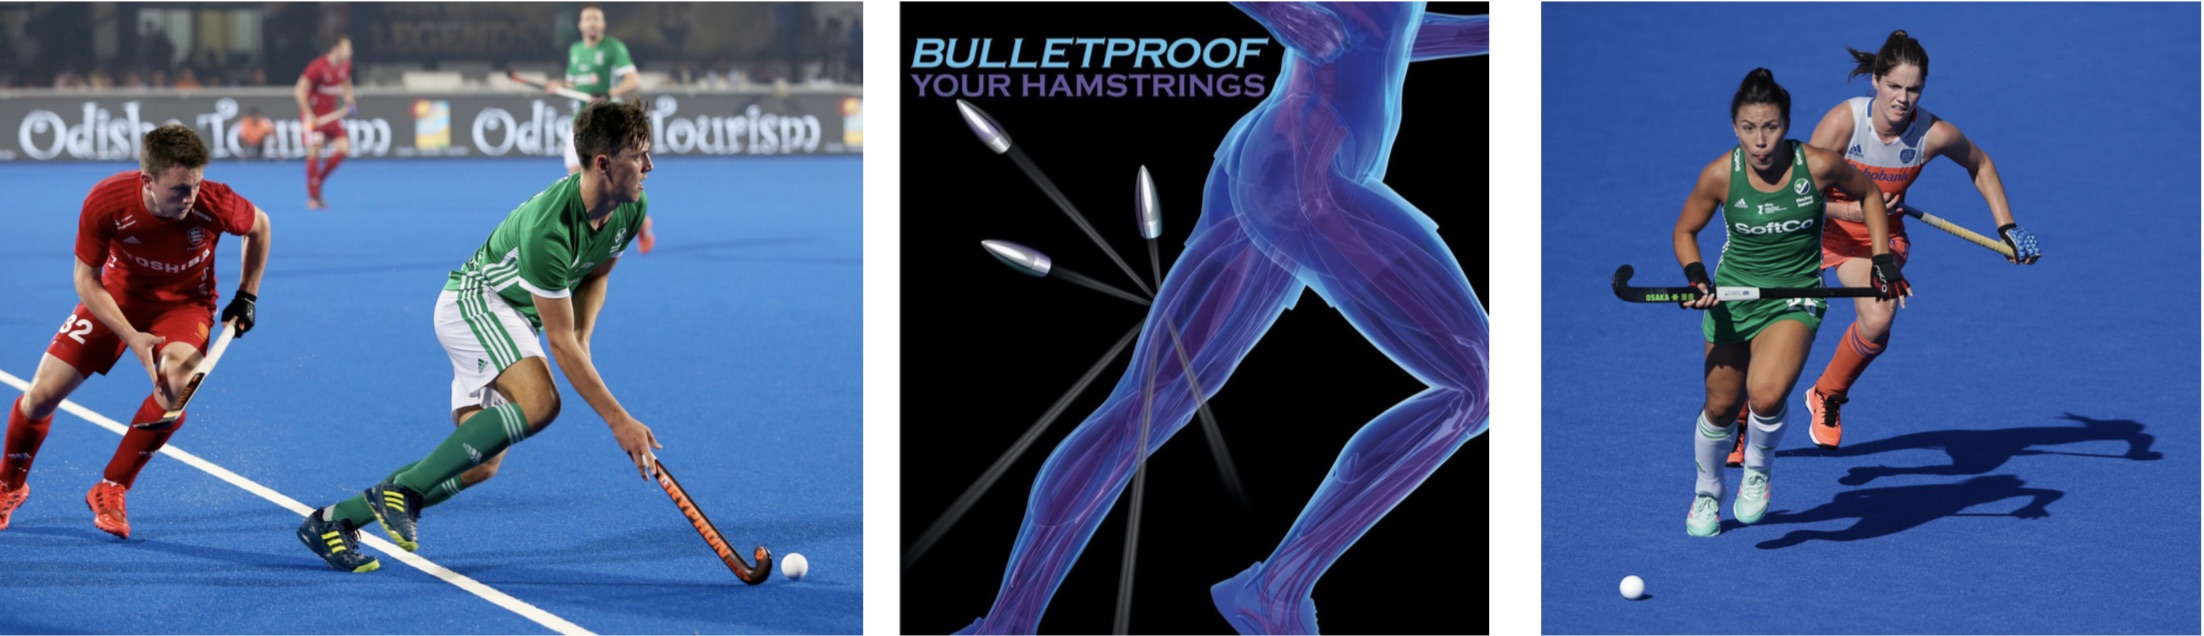 You are currently viewing Bulletproof Your Hamstrings